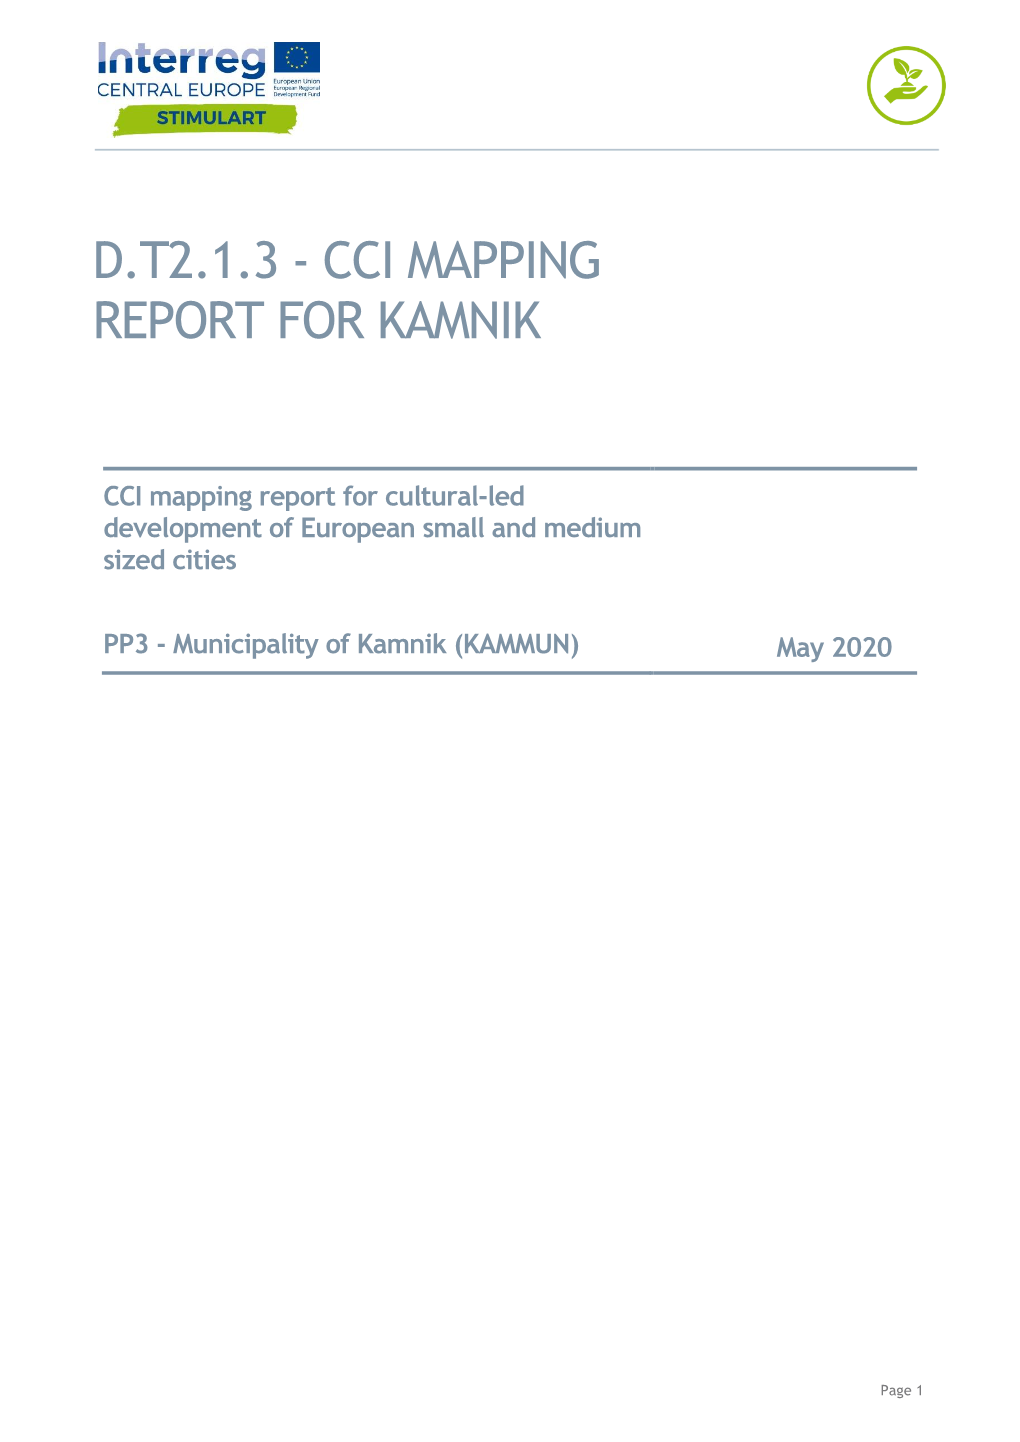 Cci Mapping Report for Kamnik